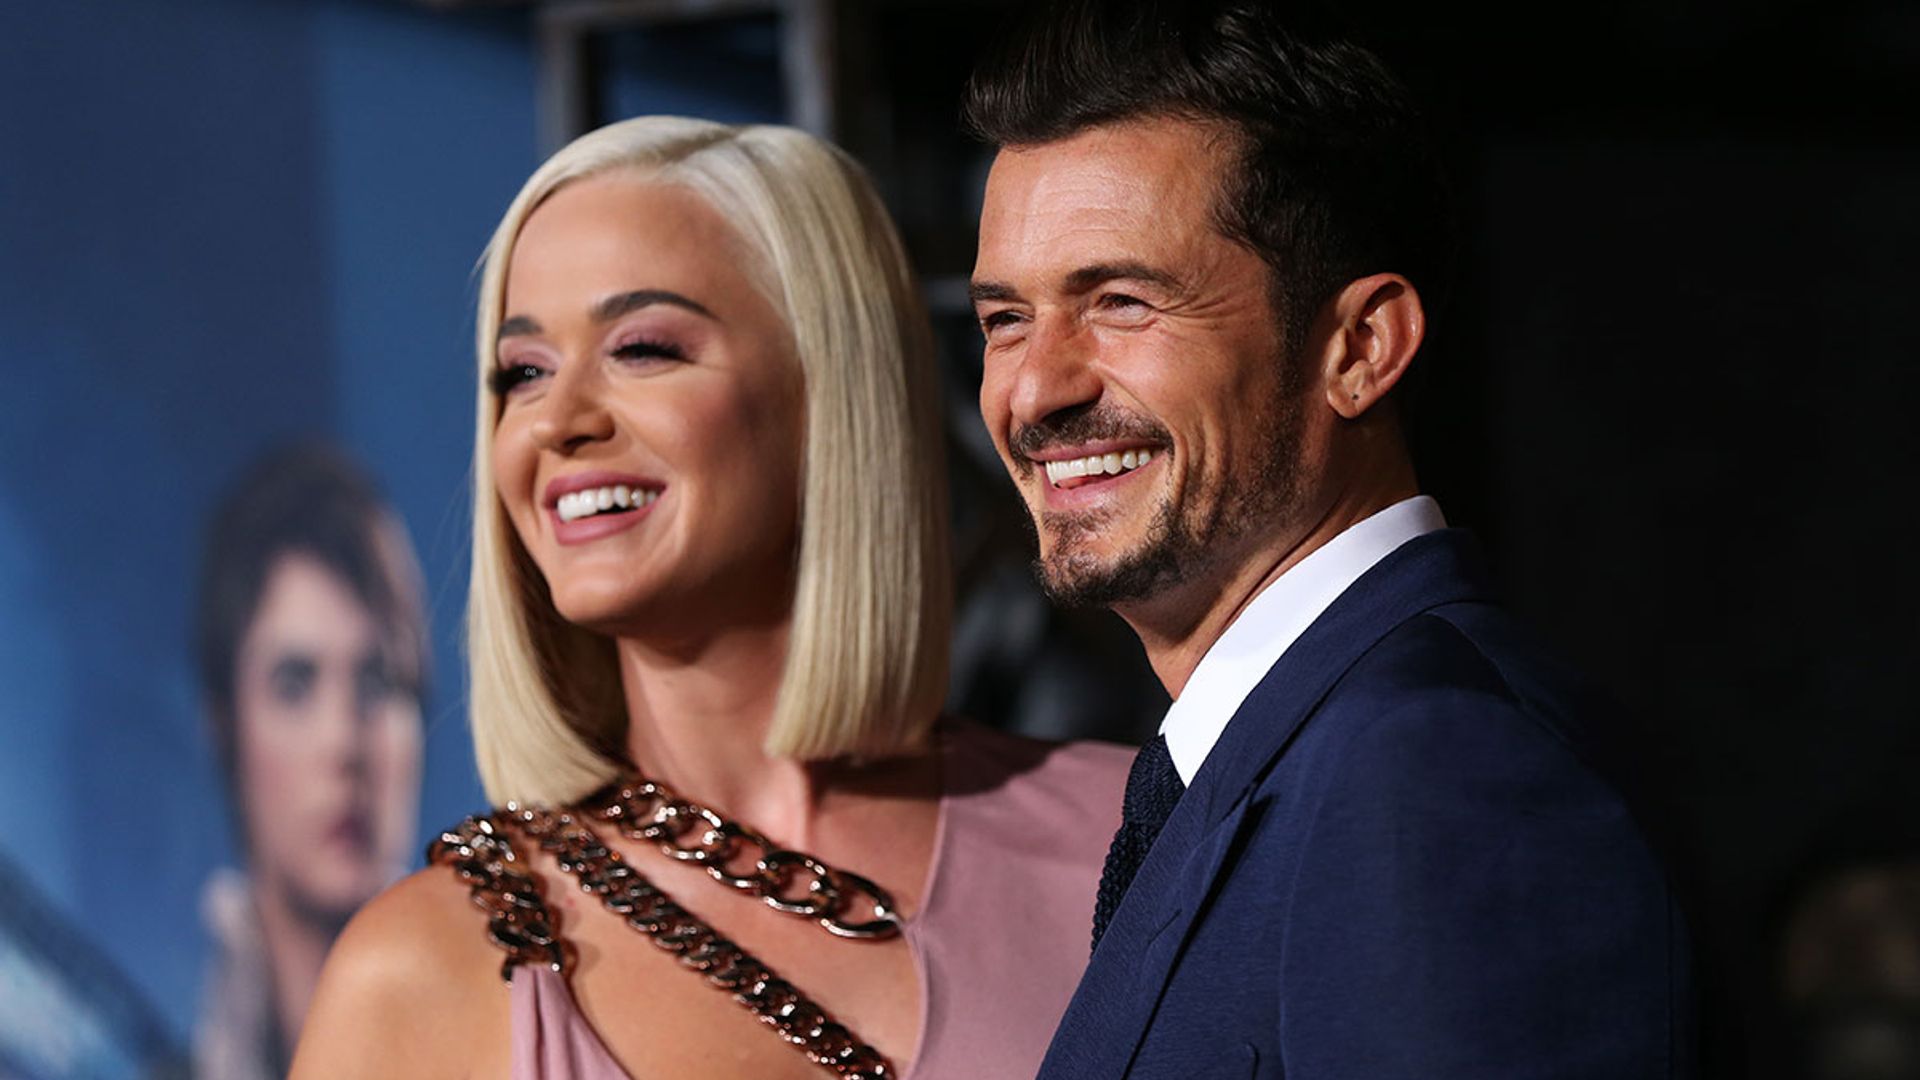 Orlando Bloom says ex Miranda Kerr and Katy Perry are 'the cutest' in adorable video